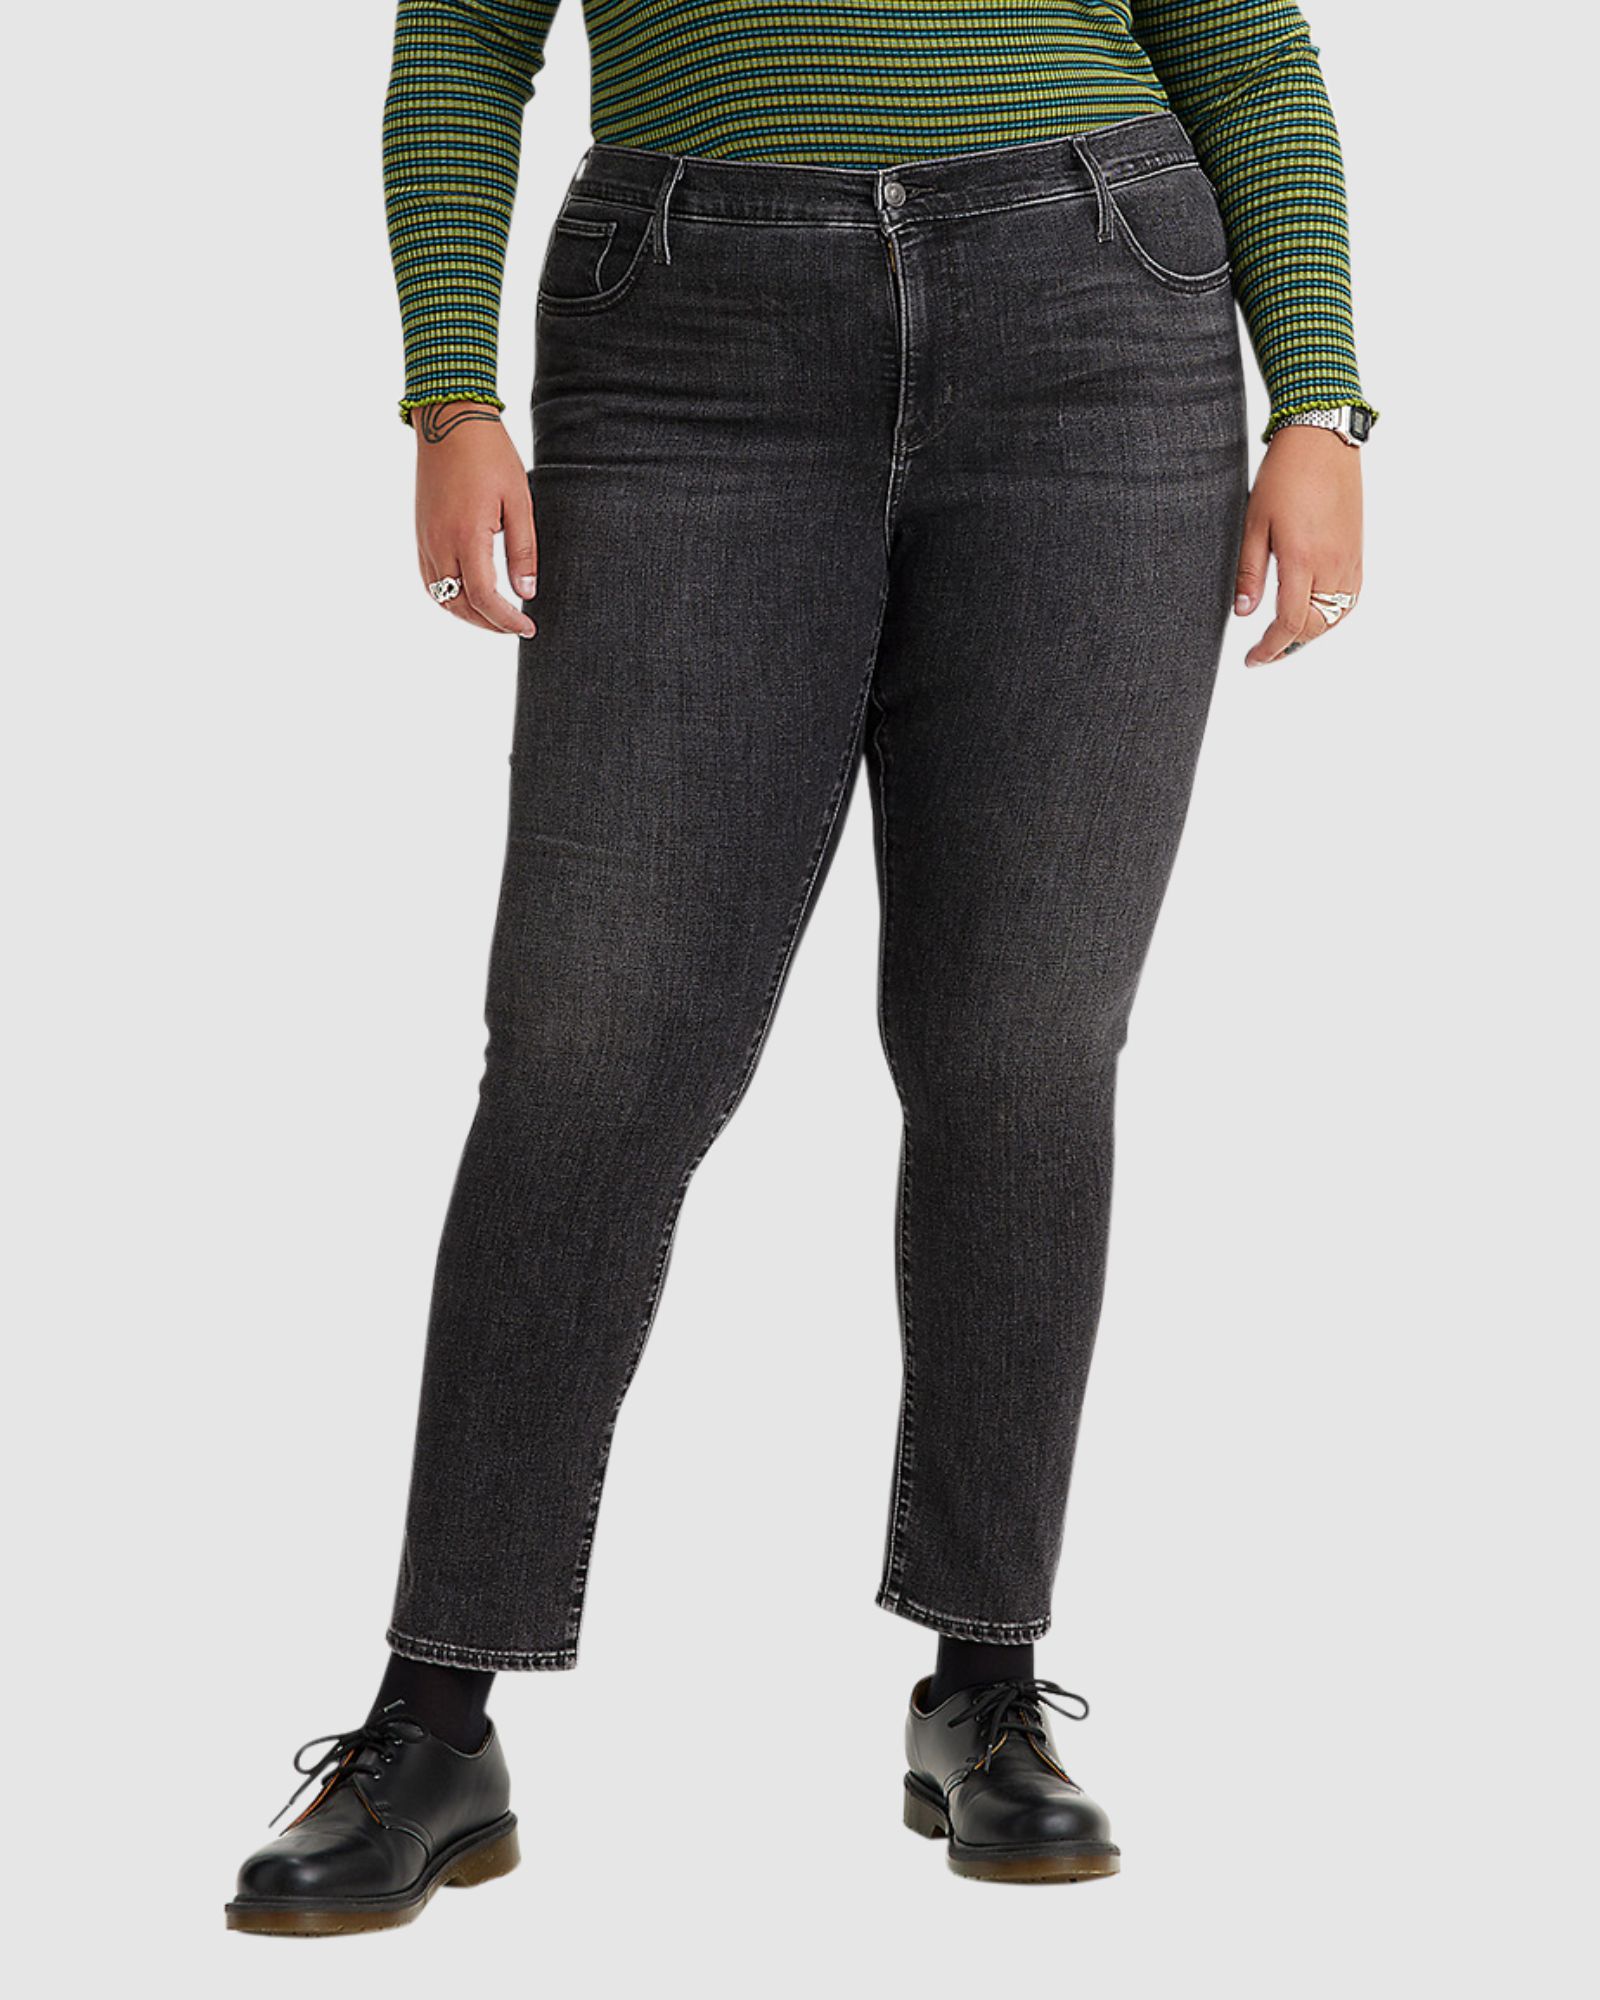 Levi's 311 Shaping Skinny Jeans (Plus) - Black Worn In | SurfStitch